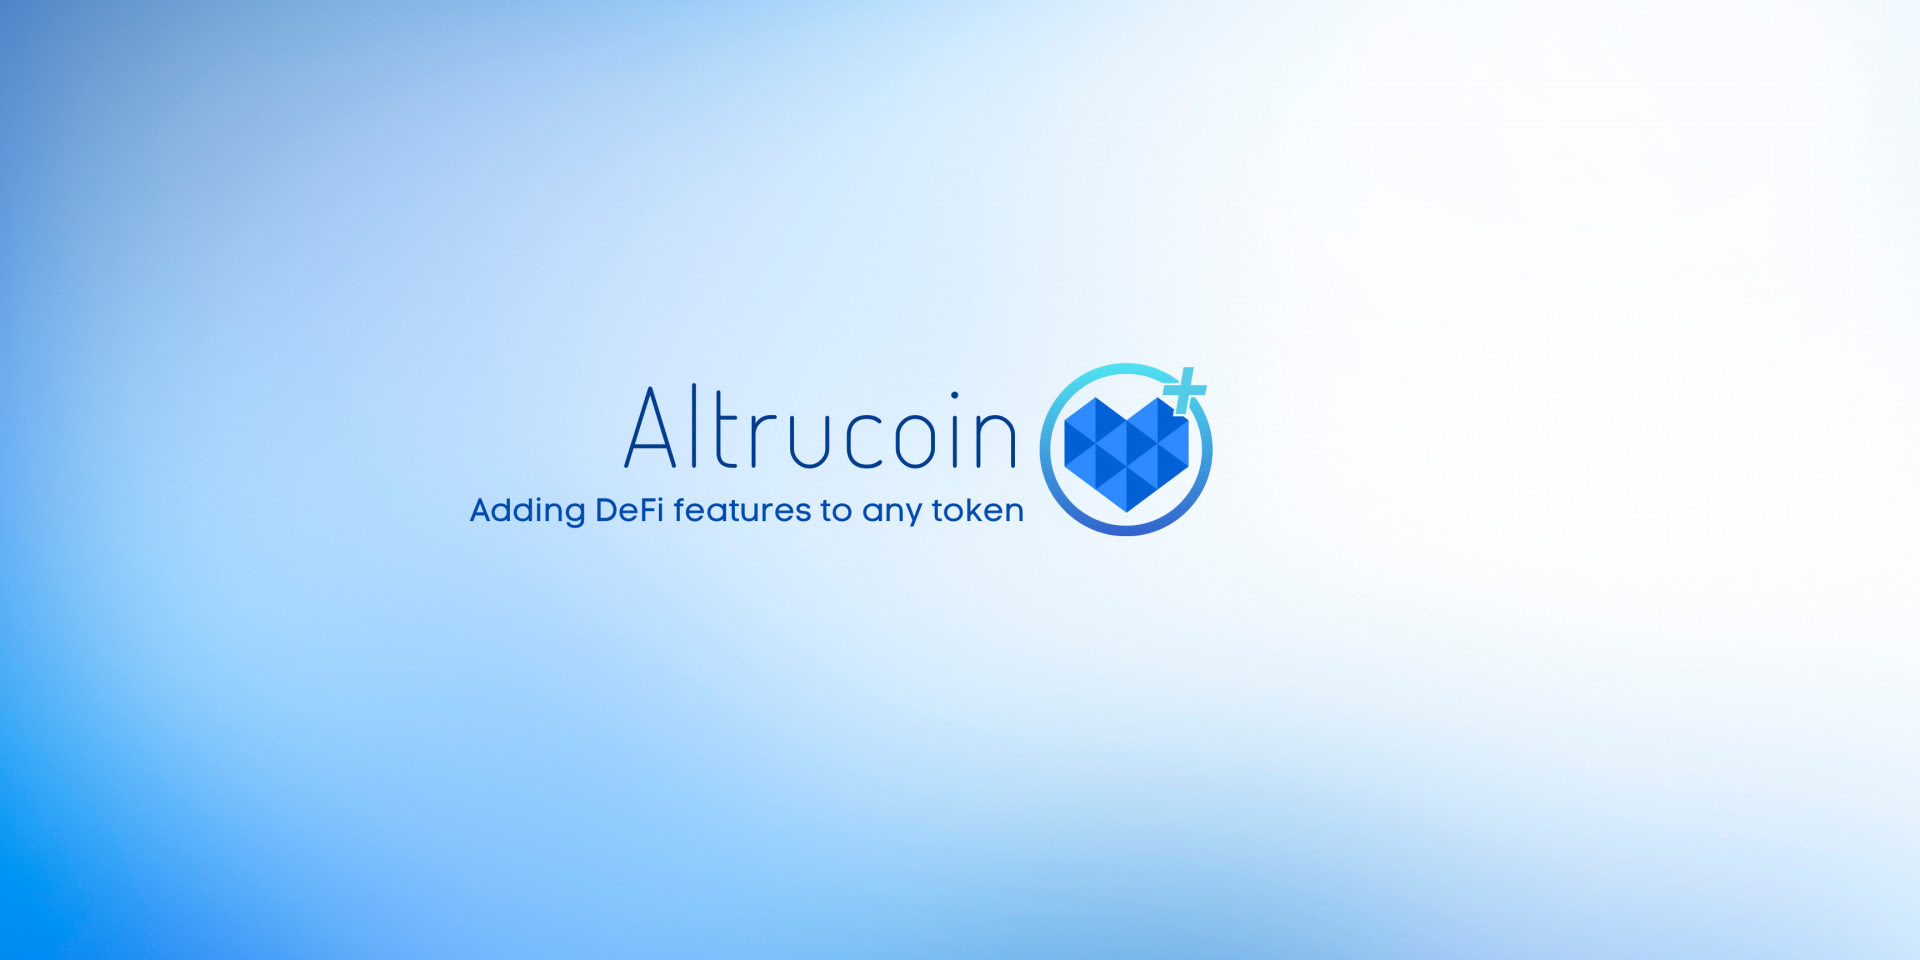 Altrucoin Combines Previous Projects To Introduce Its New DeFi Service Platform